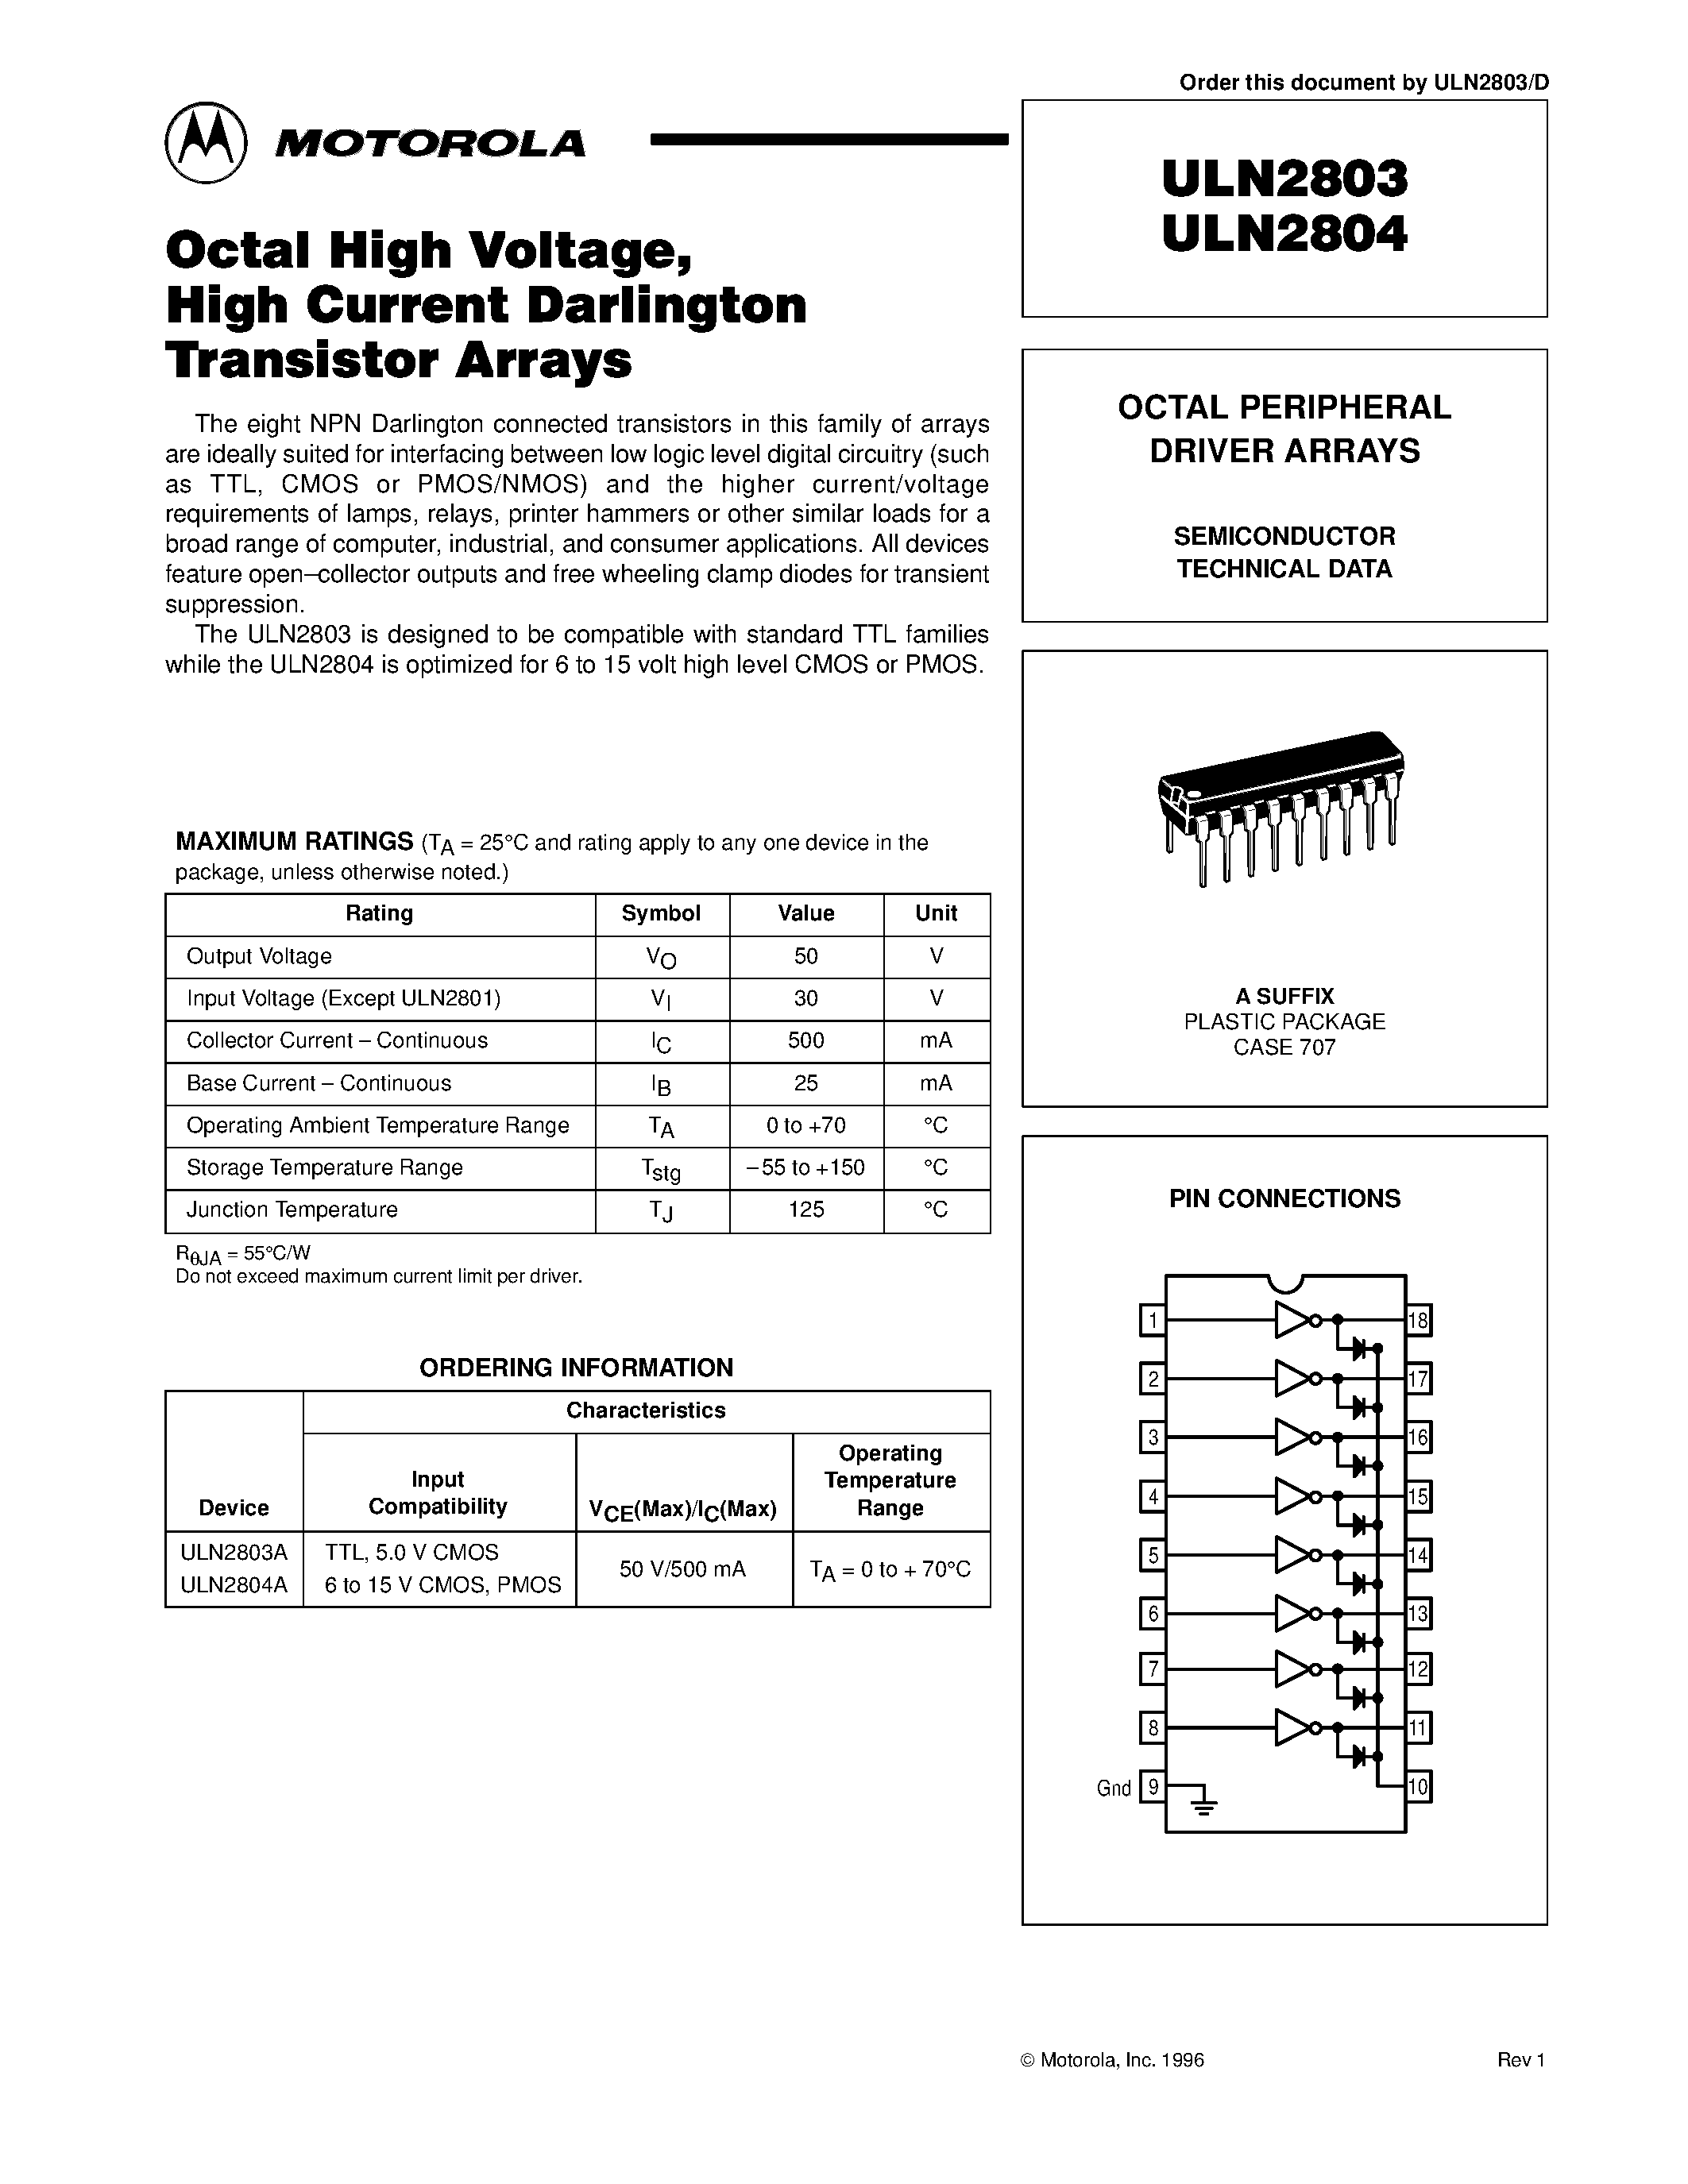 Datasheet ULN2803A - OCTAL PERIPHERAL DRIVER ARRAYS page 1